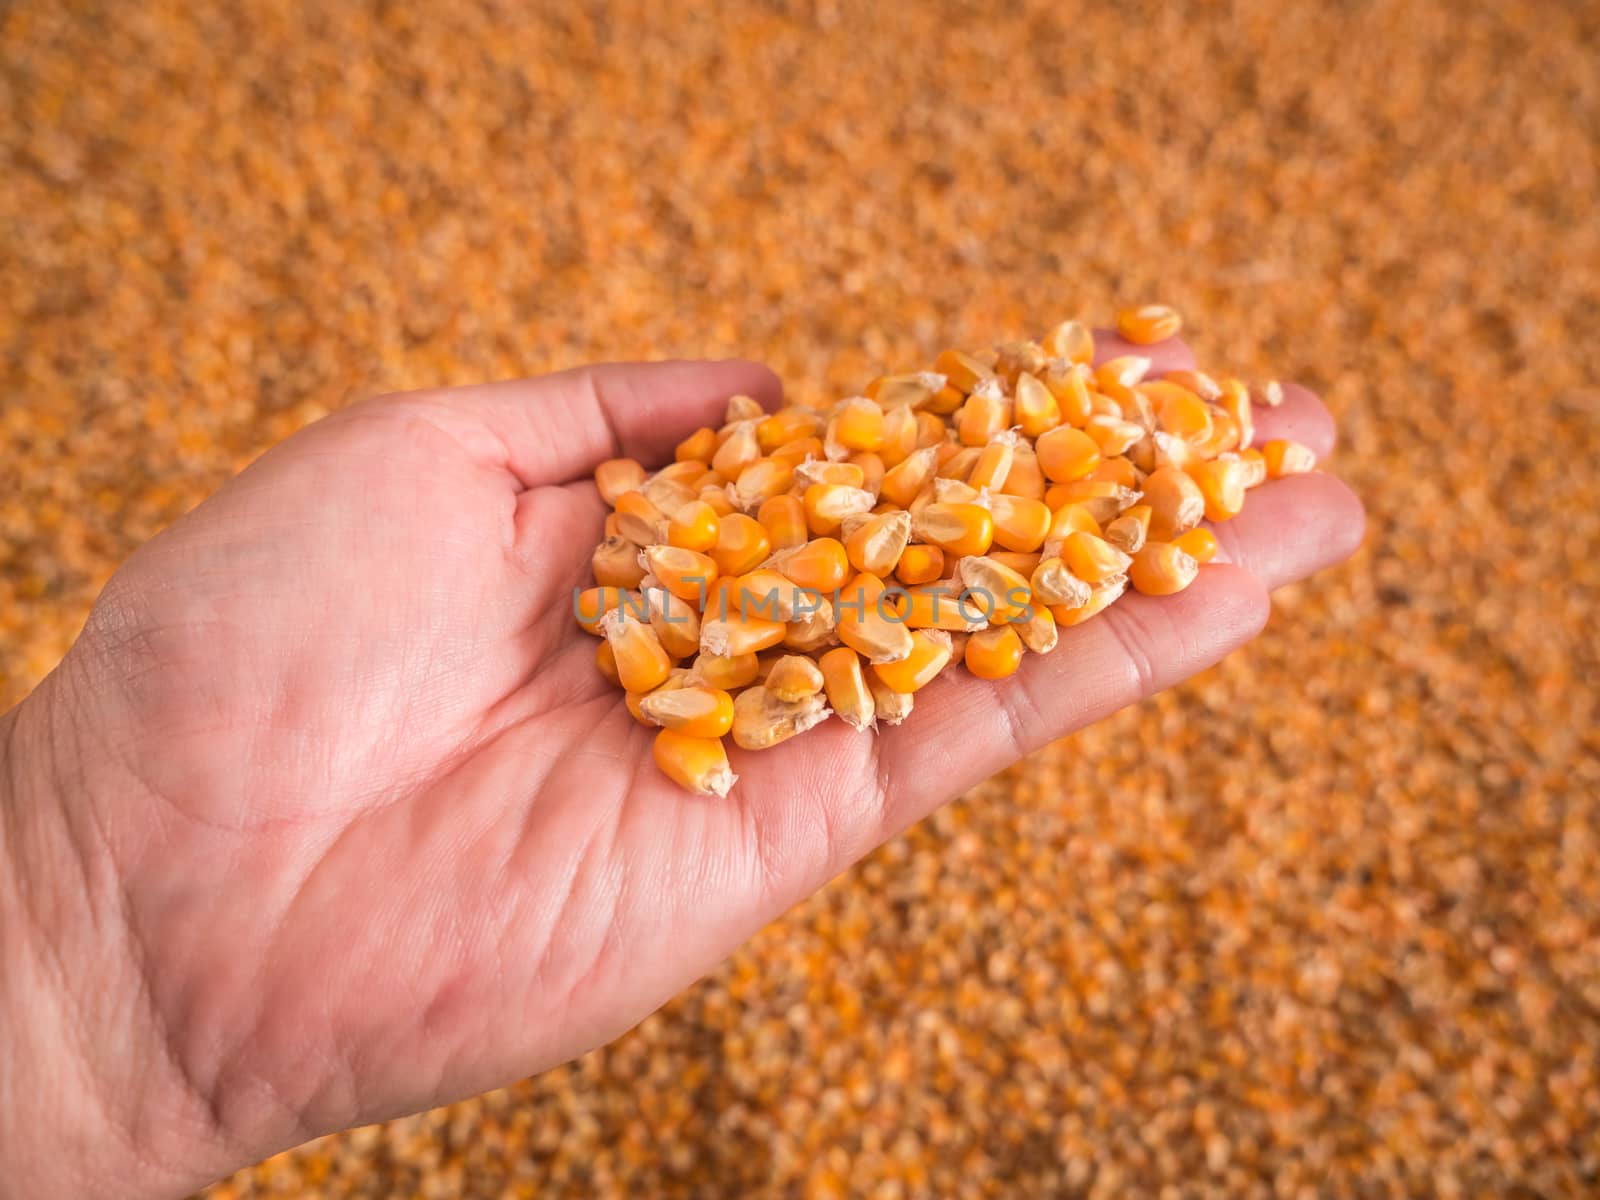 Corn seeds in hand with pile of ripe corn seeds in background. by lavoview